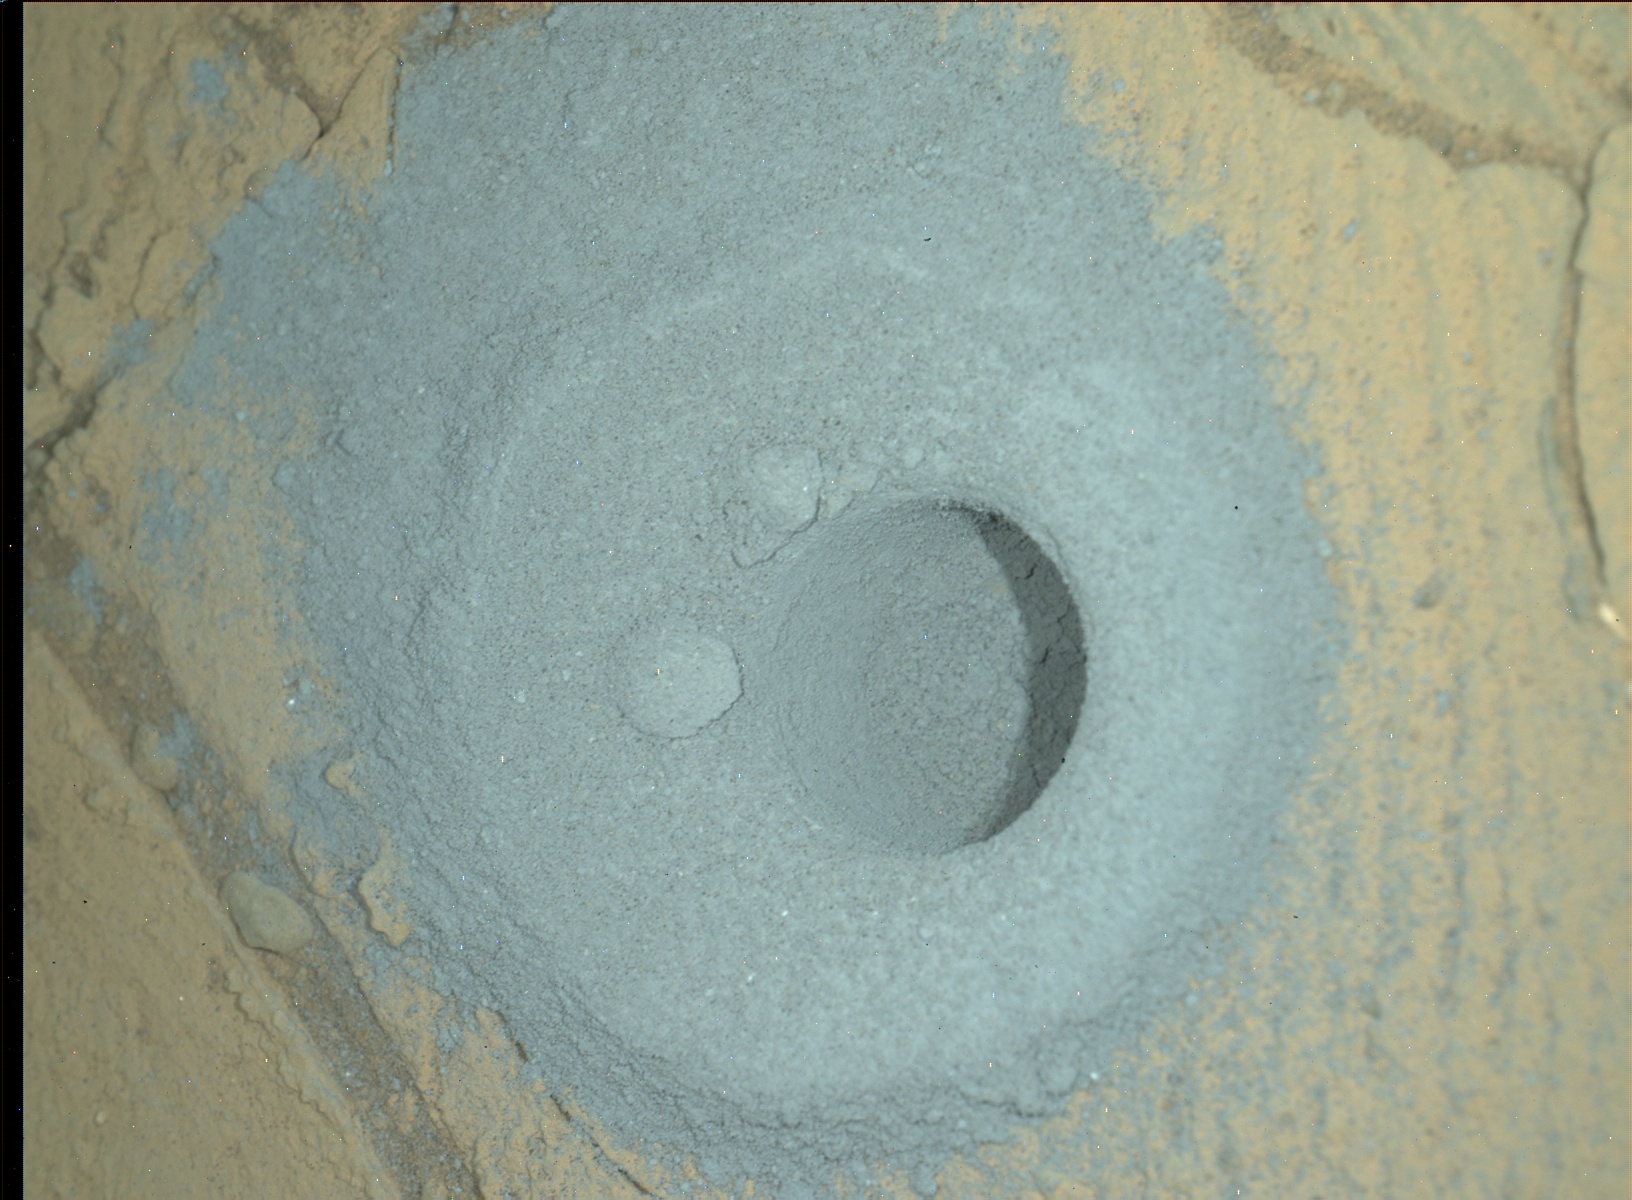 Nasa's Mars rover Curiosity acquired this image using its Mars Hand Lens Imager (MAHLI) on Sol 910